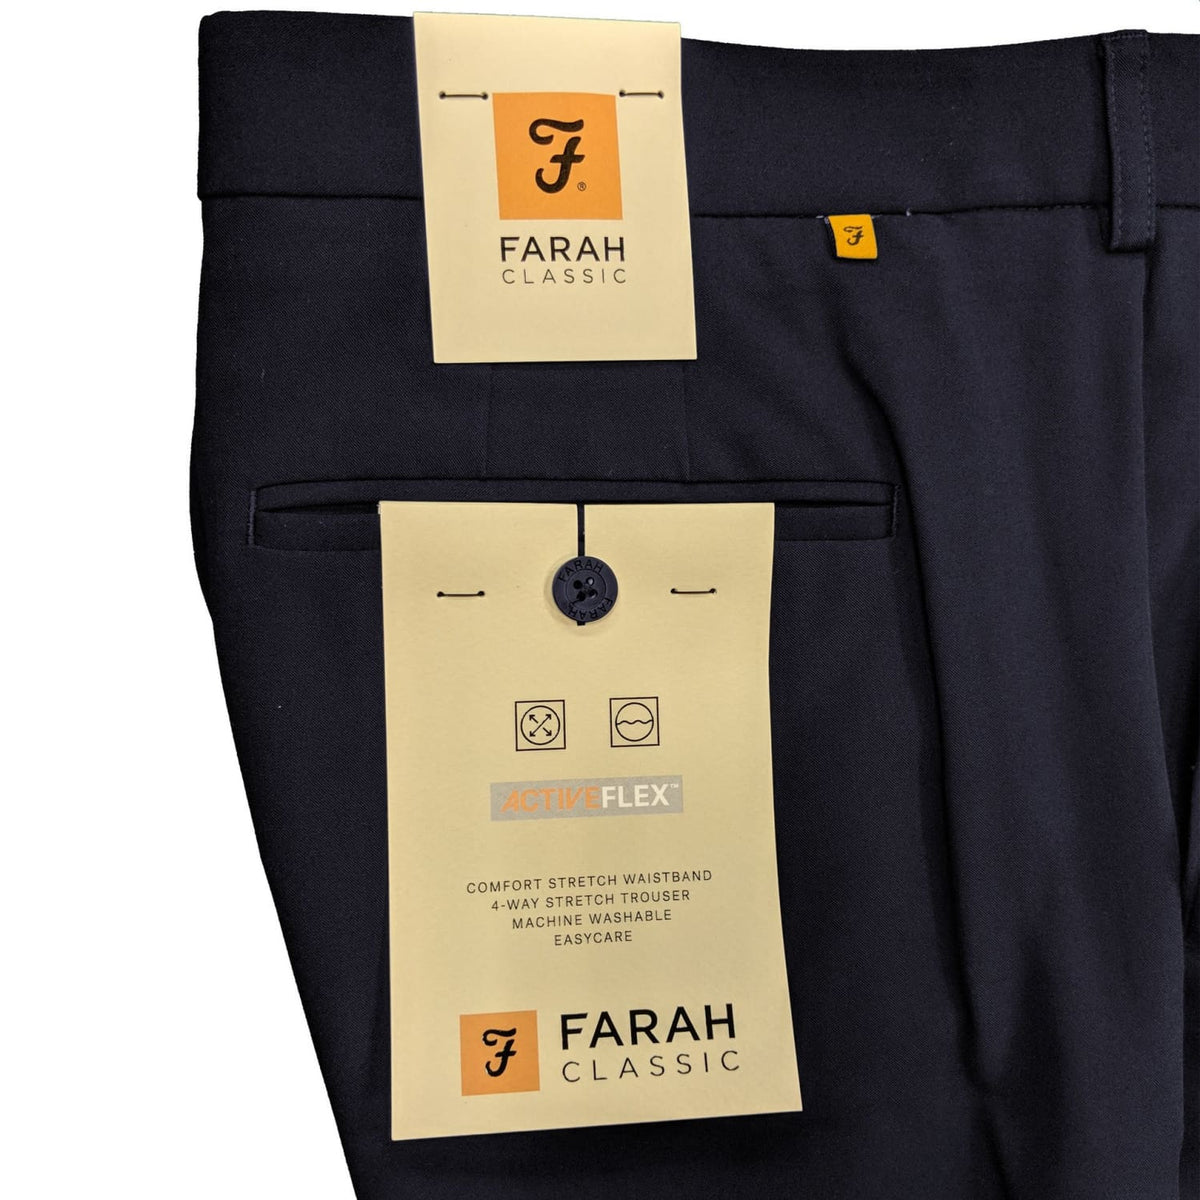 FARAH CLASSIC FABS4017 Mens Trouser Flat Front Straight Tobacco 210 Cotton  Twill  Top Brand Outlet UK